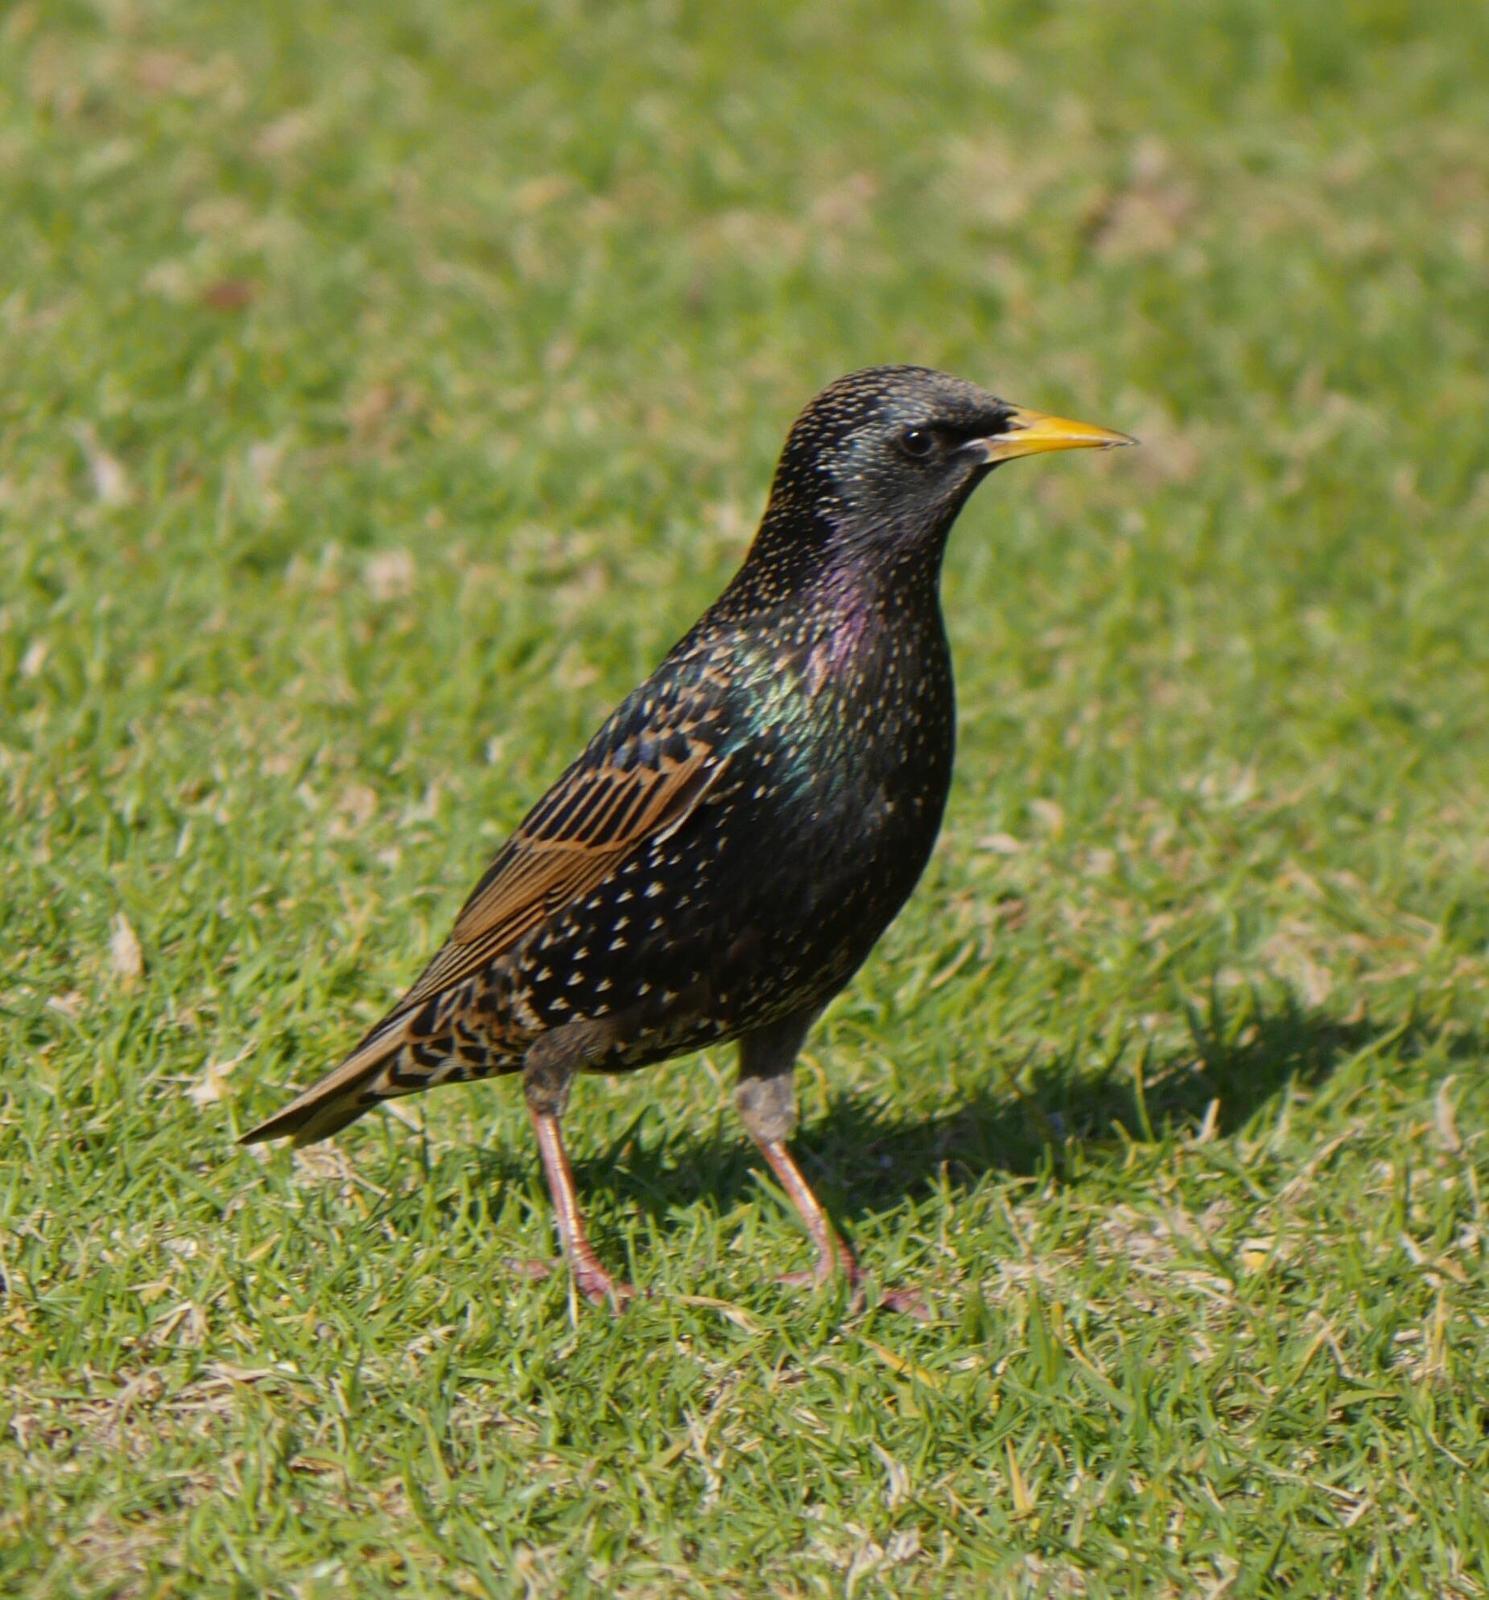 European Starling Photo by Peter Lowe